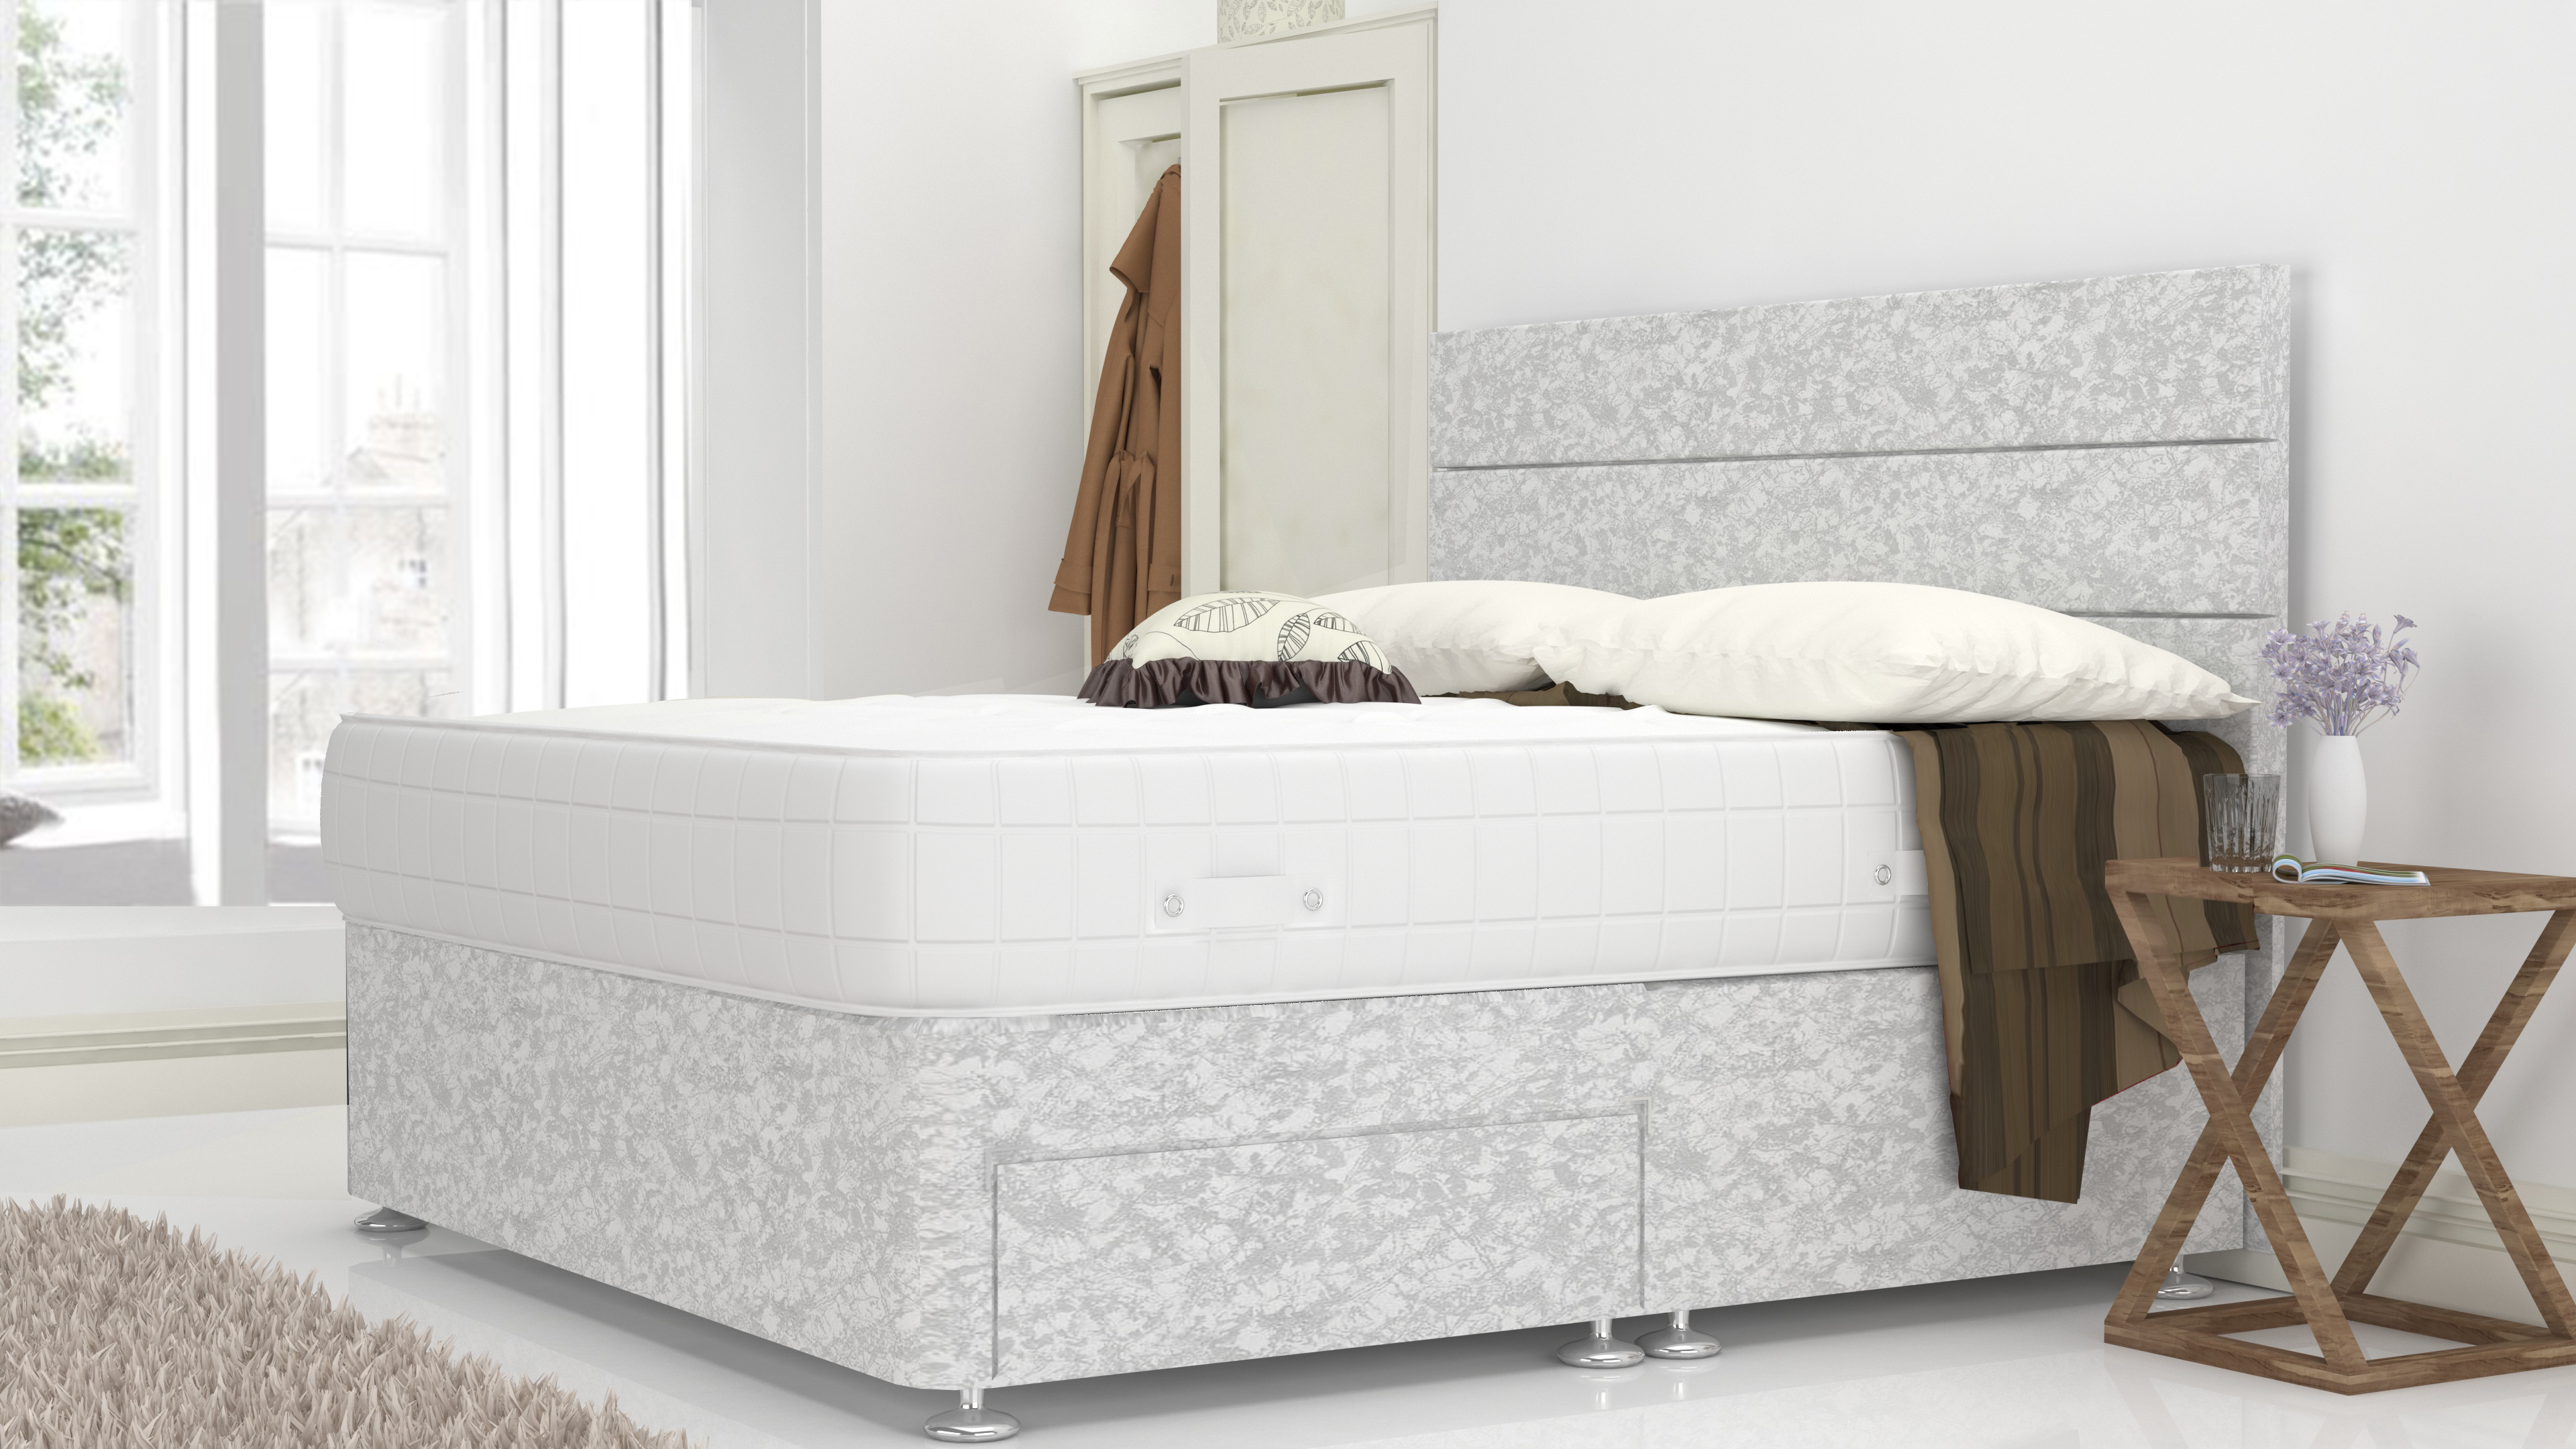 White Crushed Velvet 4 Feet Divan Bed With 3 Panel Headboard (Included Feet) And Free Pillow Top Mattress